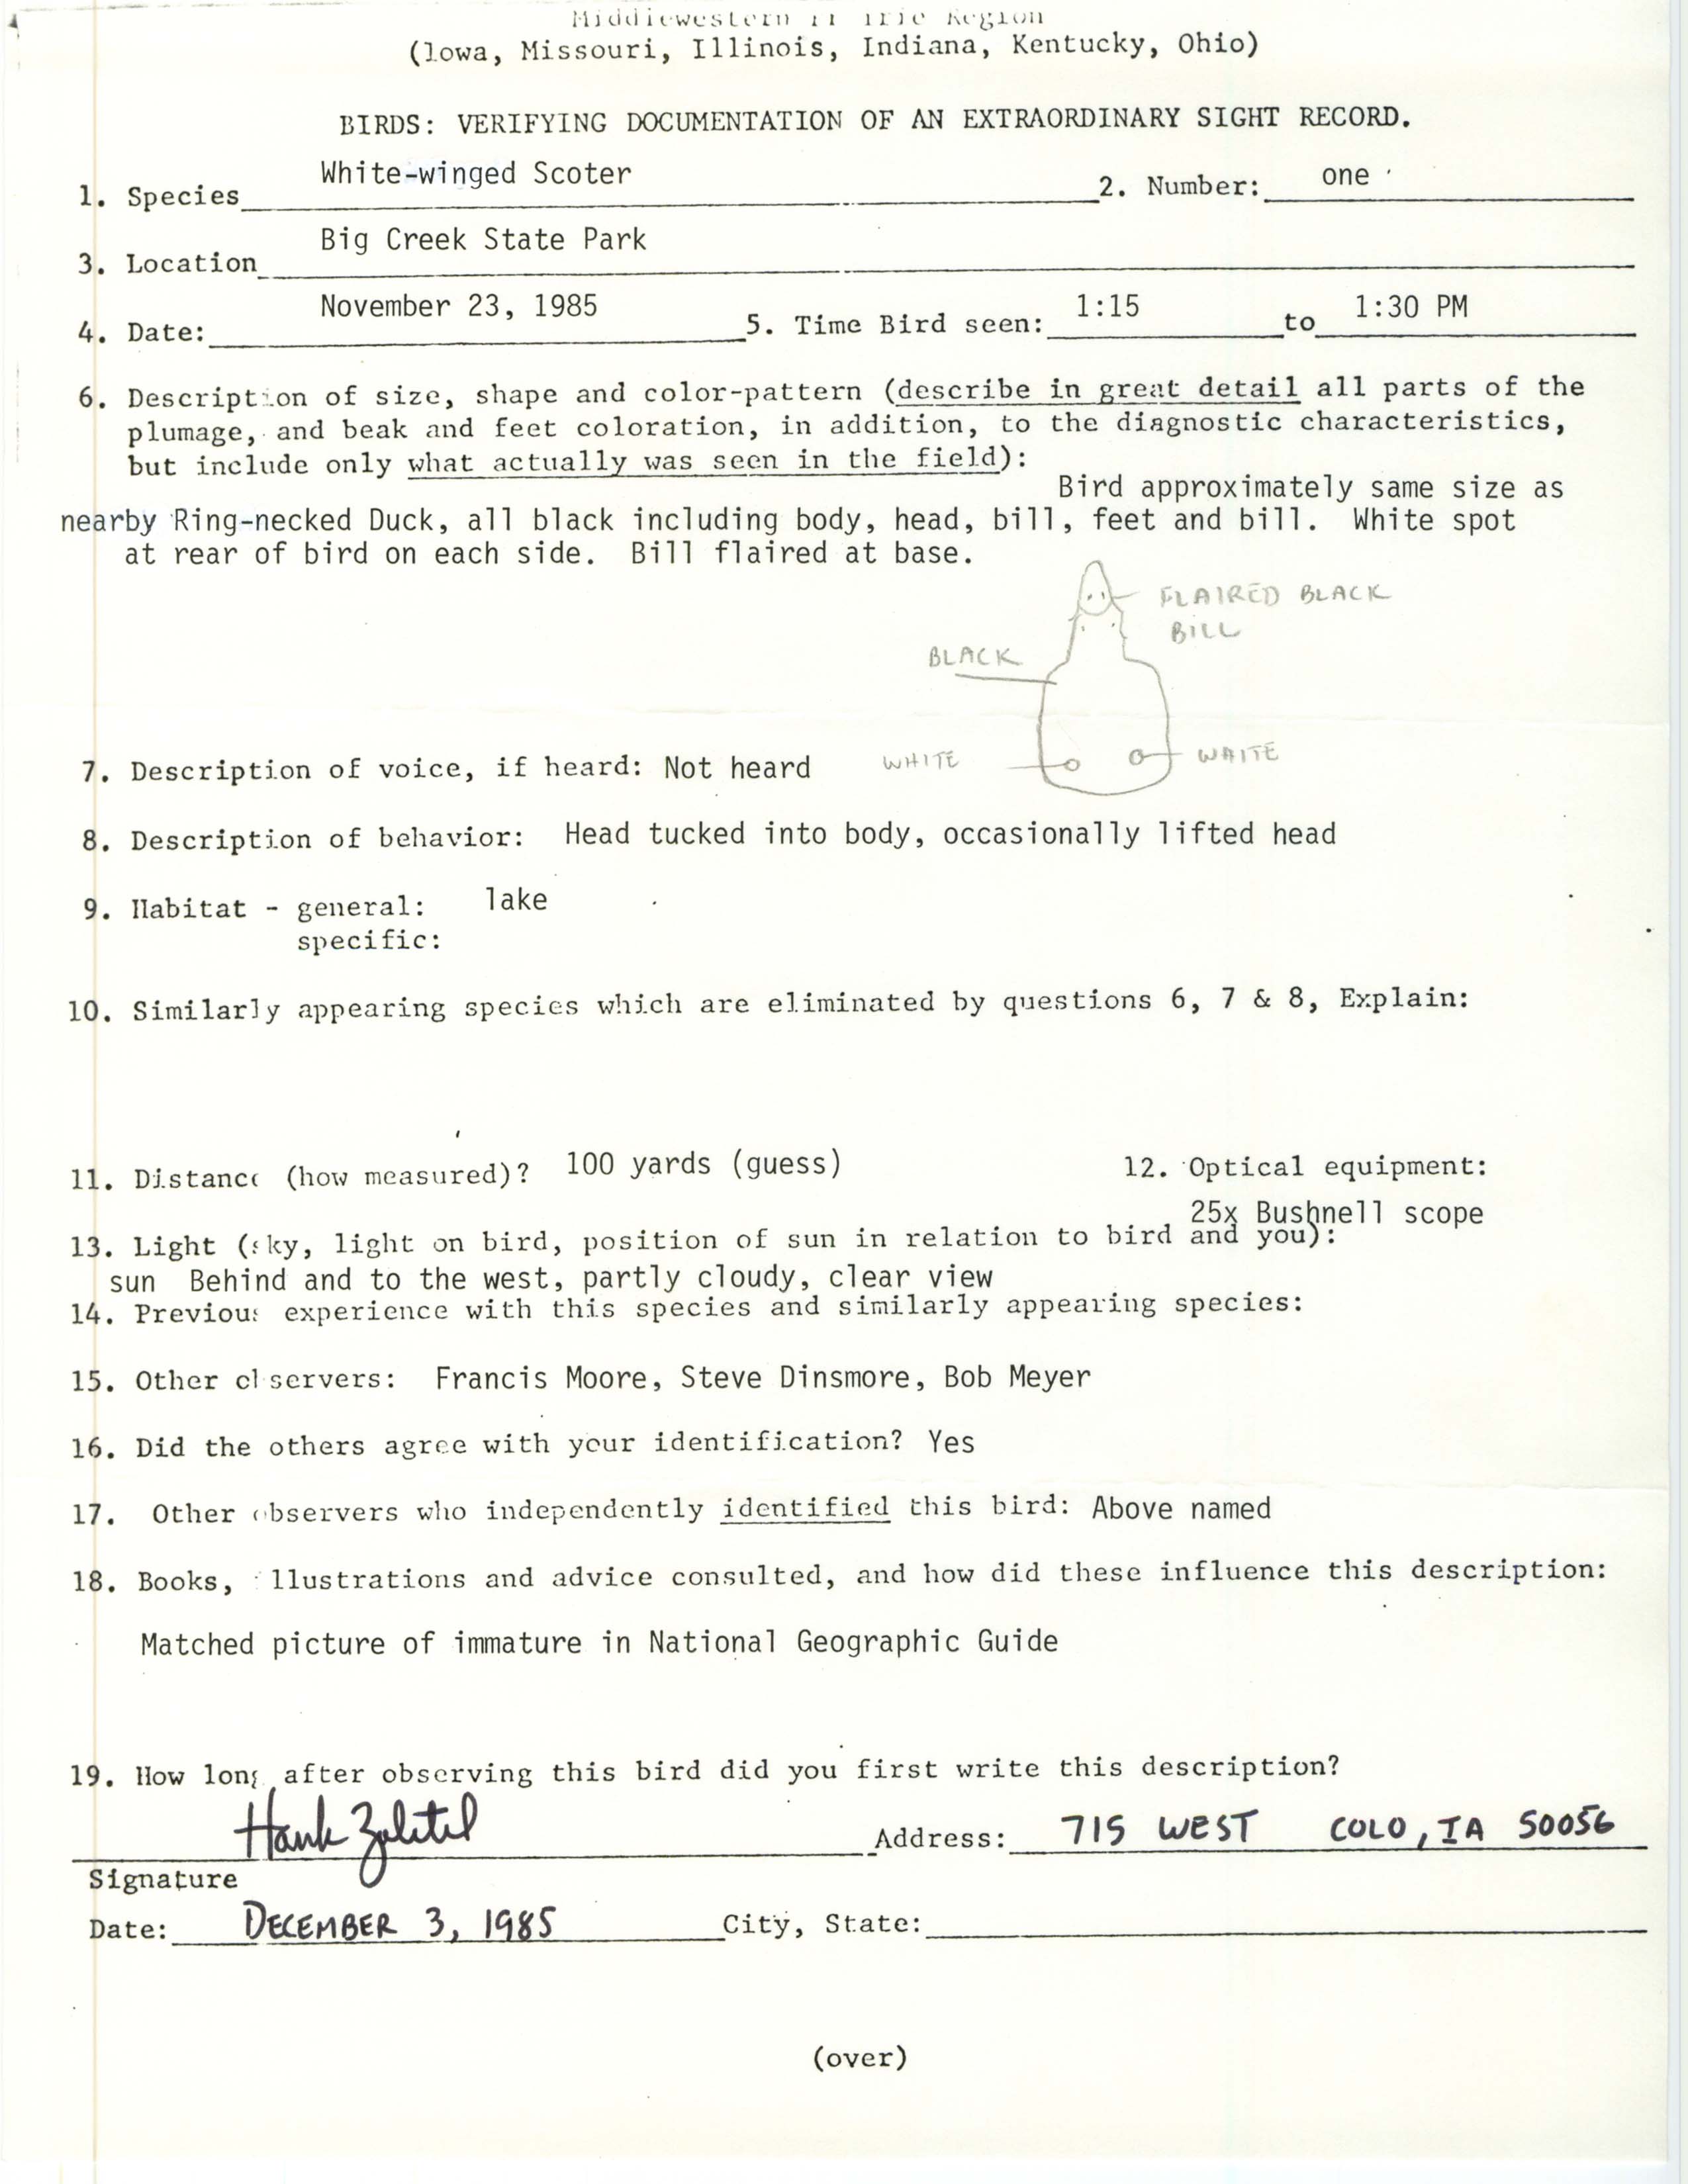 Rare bird documentation form for White-winged Scoter at Big Creek State Park, 1985